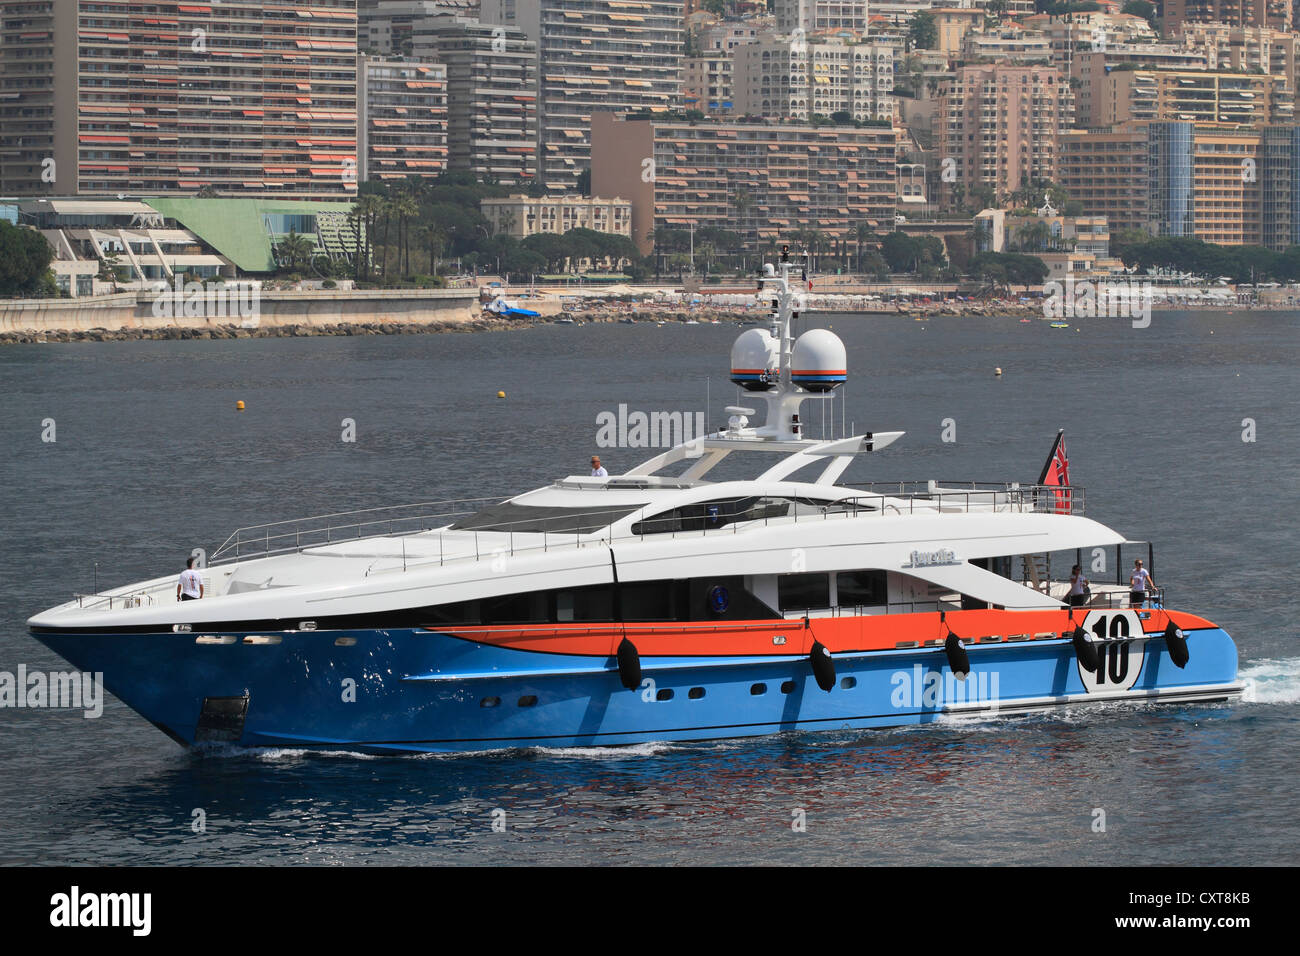 Aurelia, a cruiser built by Hesse Yachts, length: 36.80 meters, built in 2011, Principality of Monaco, French Riviera Stock Photo